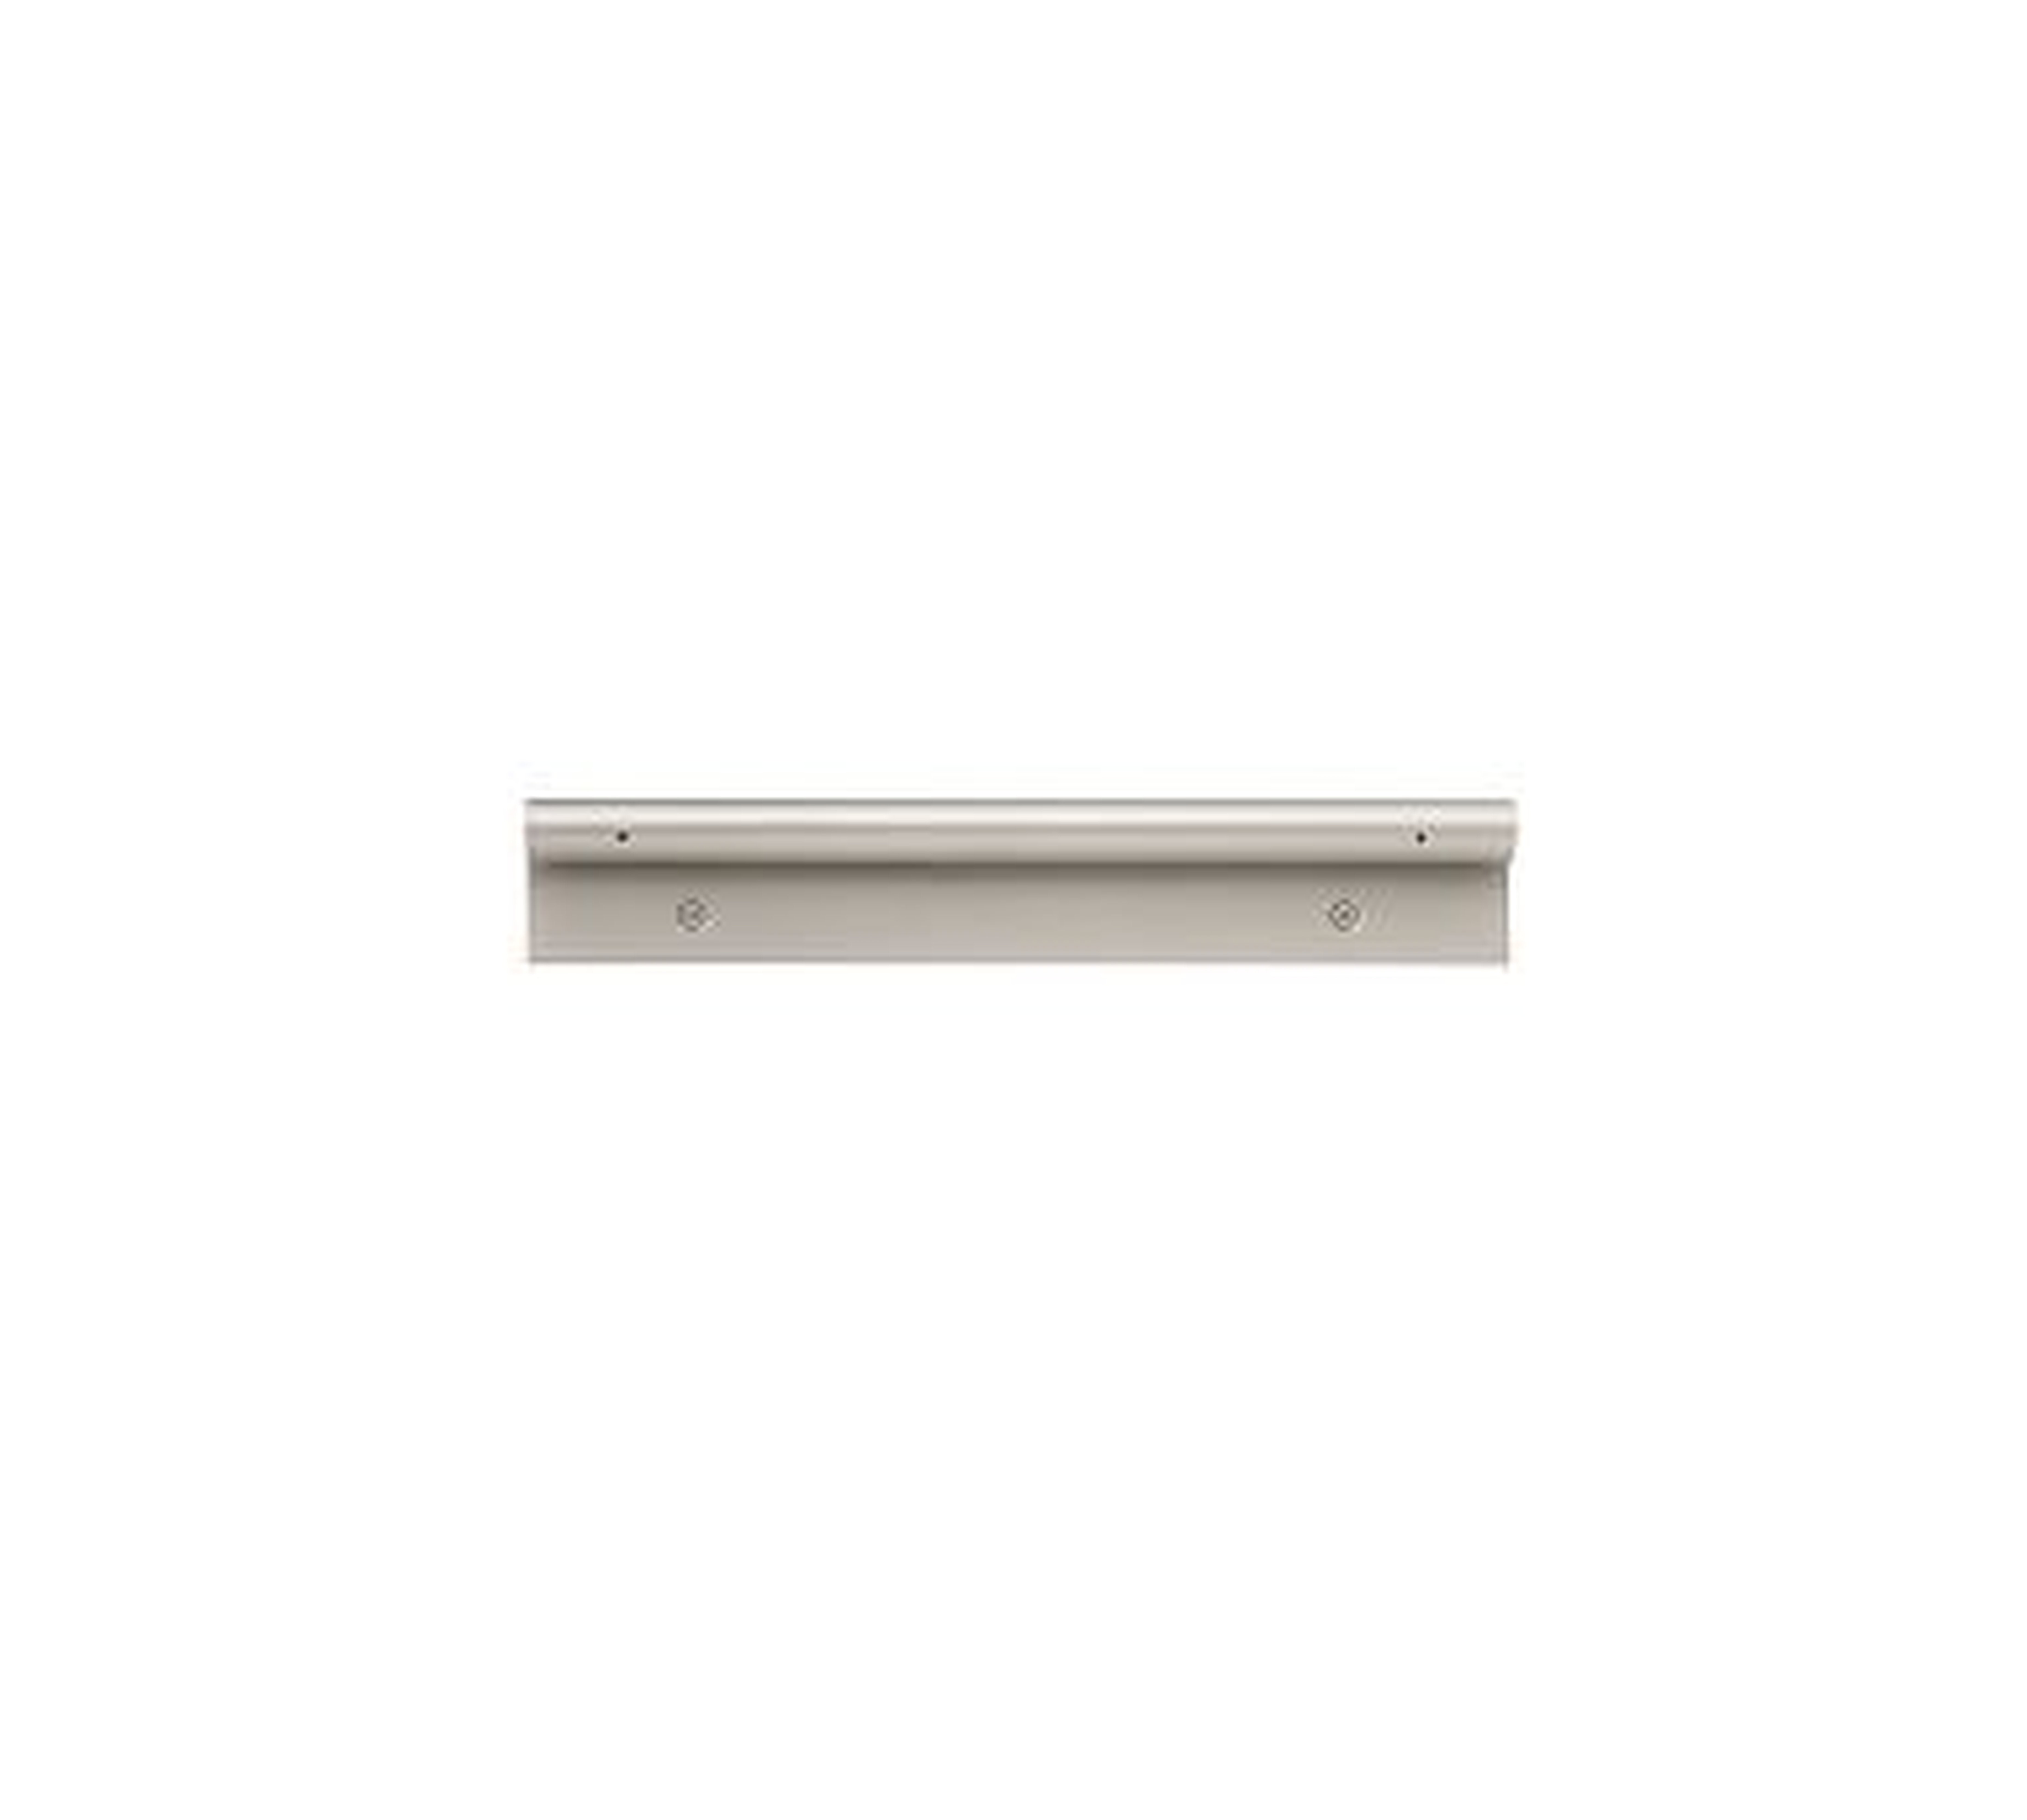 Daily System Top Display Rod, 12", Silver Finish - Pottery Barn